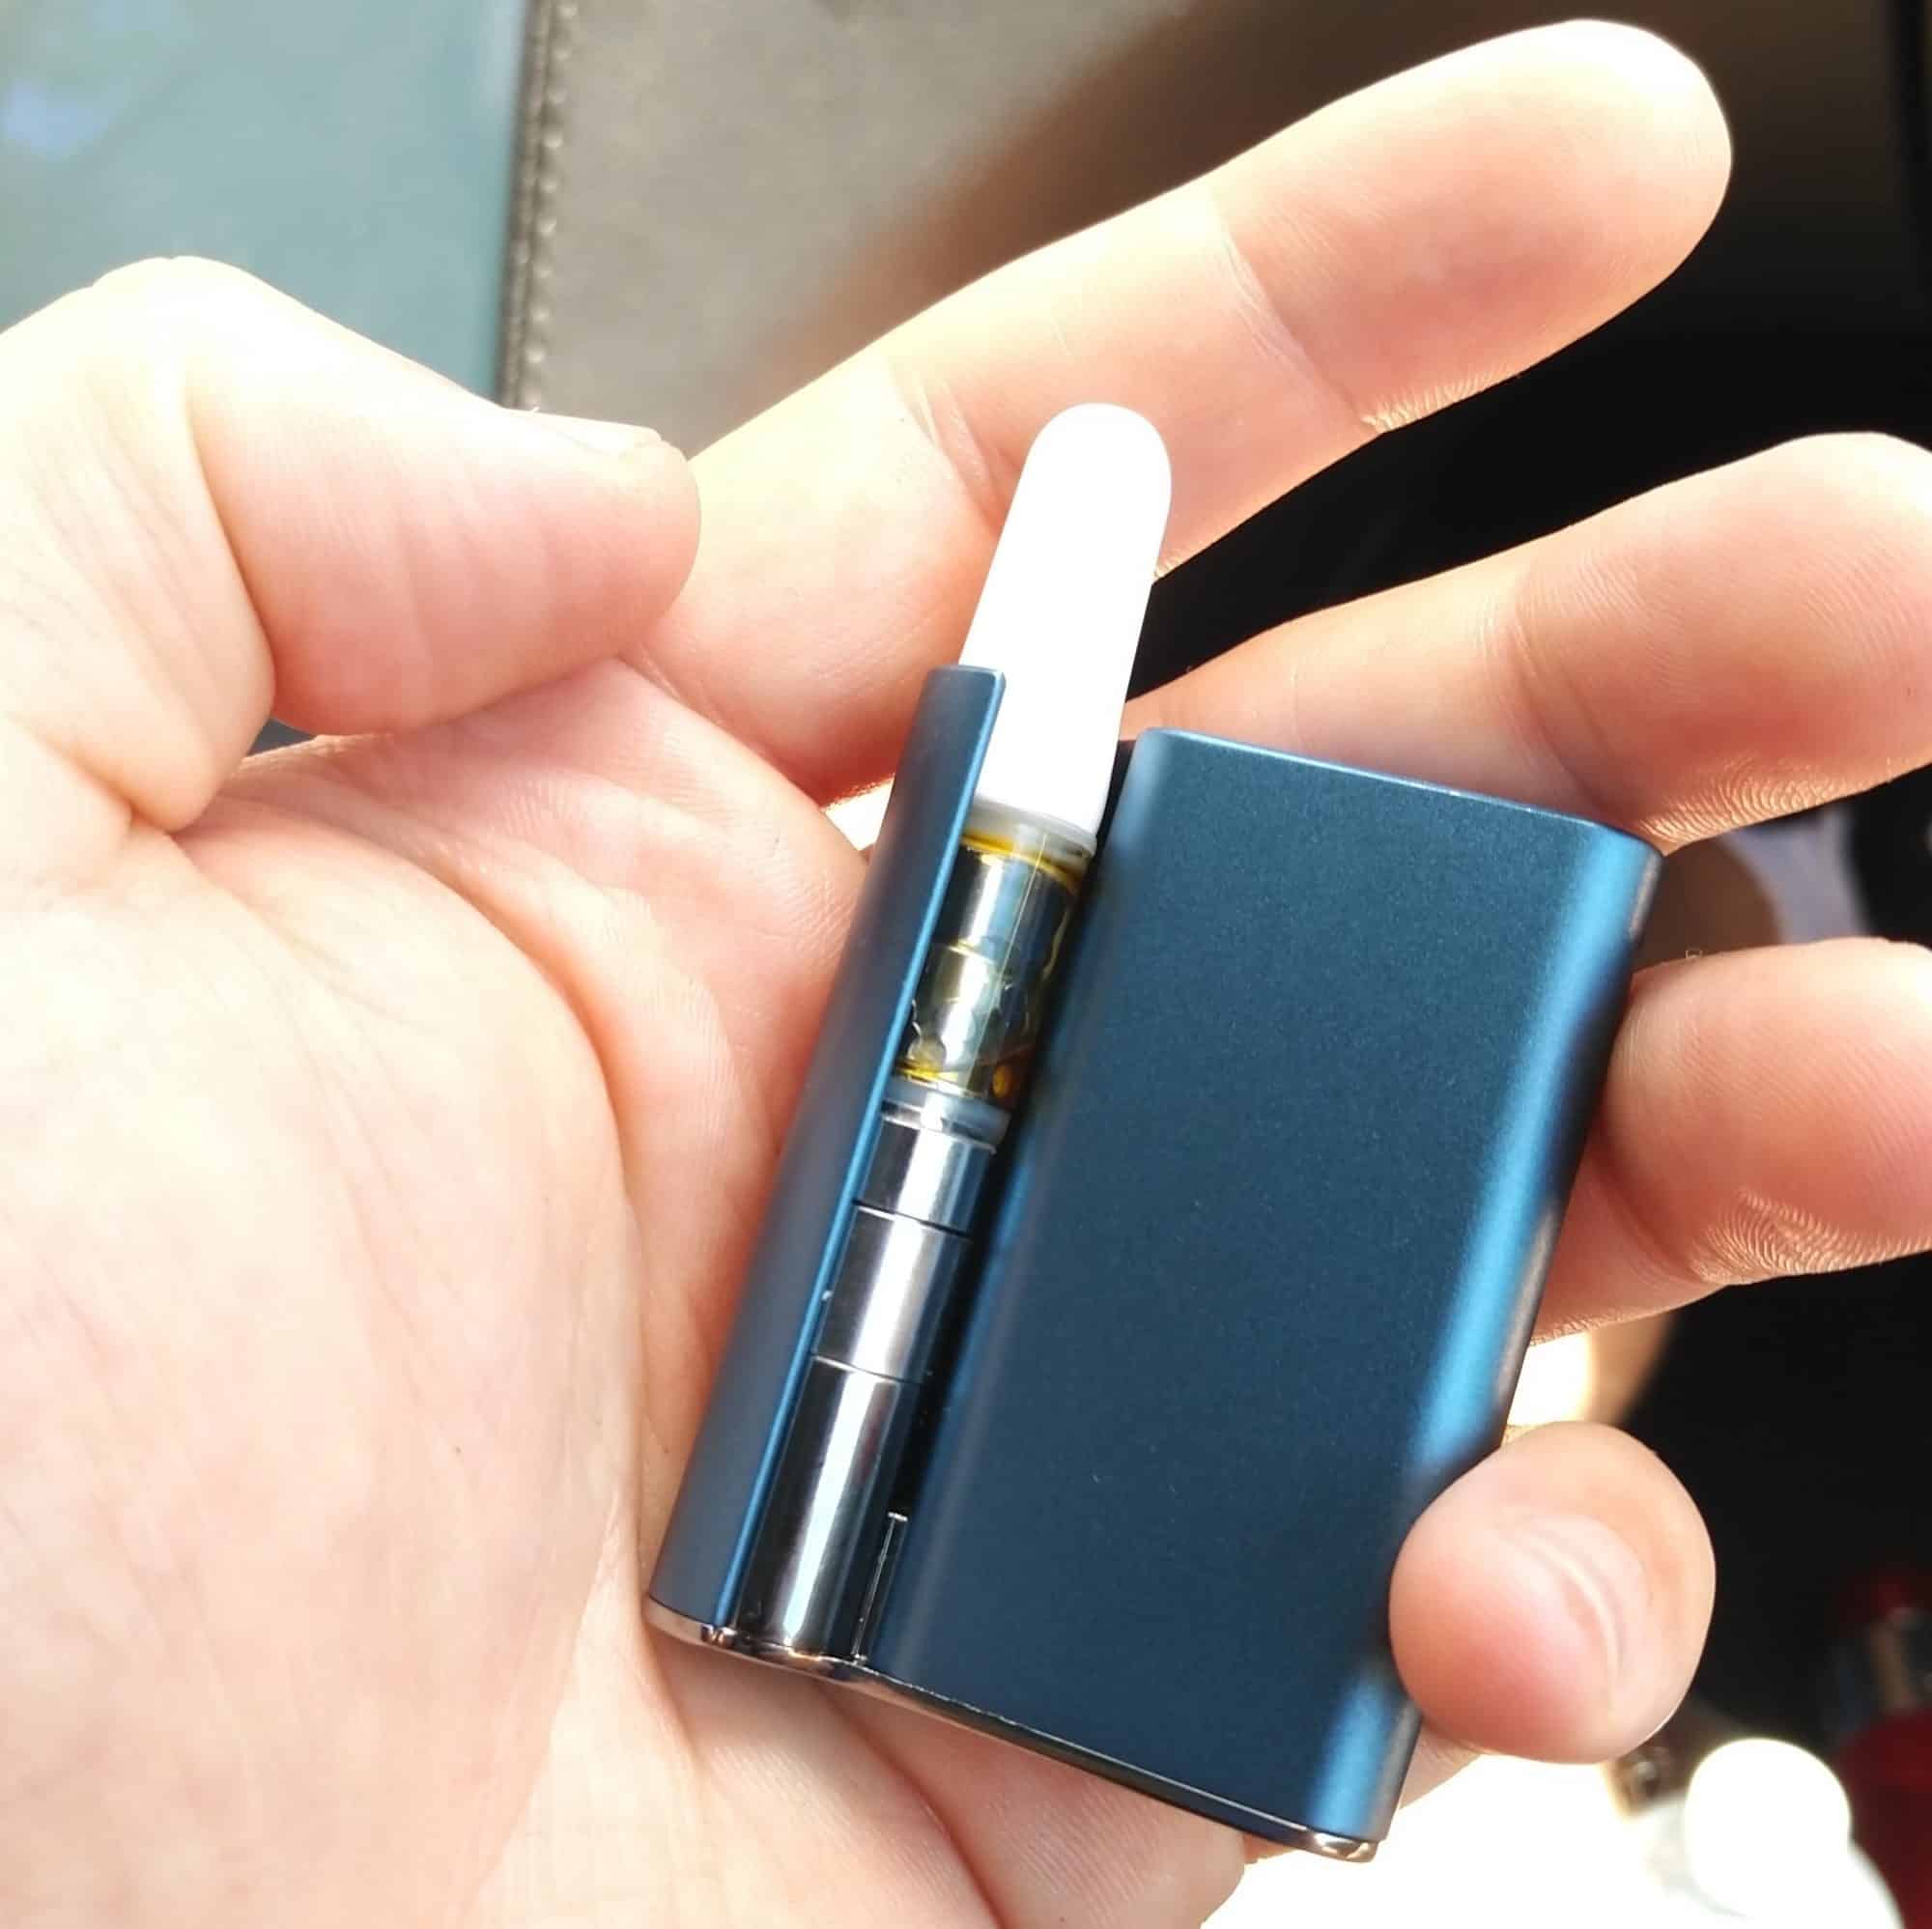 Ccell palm review